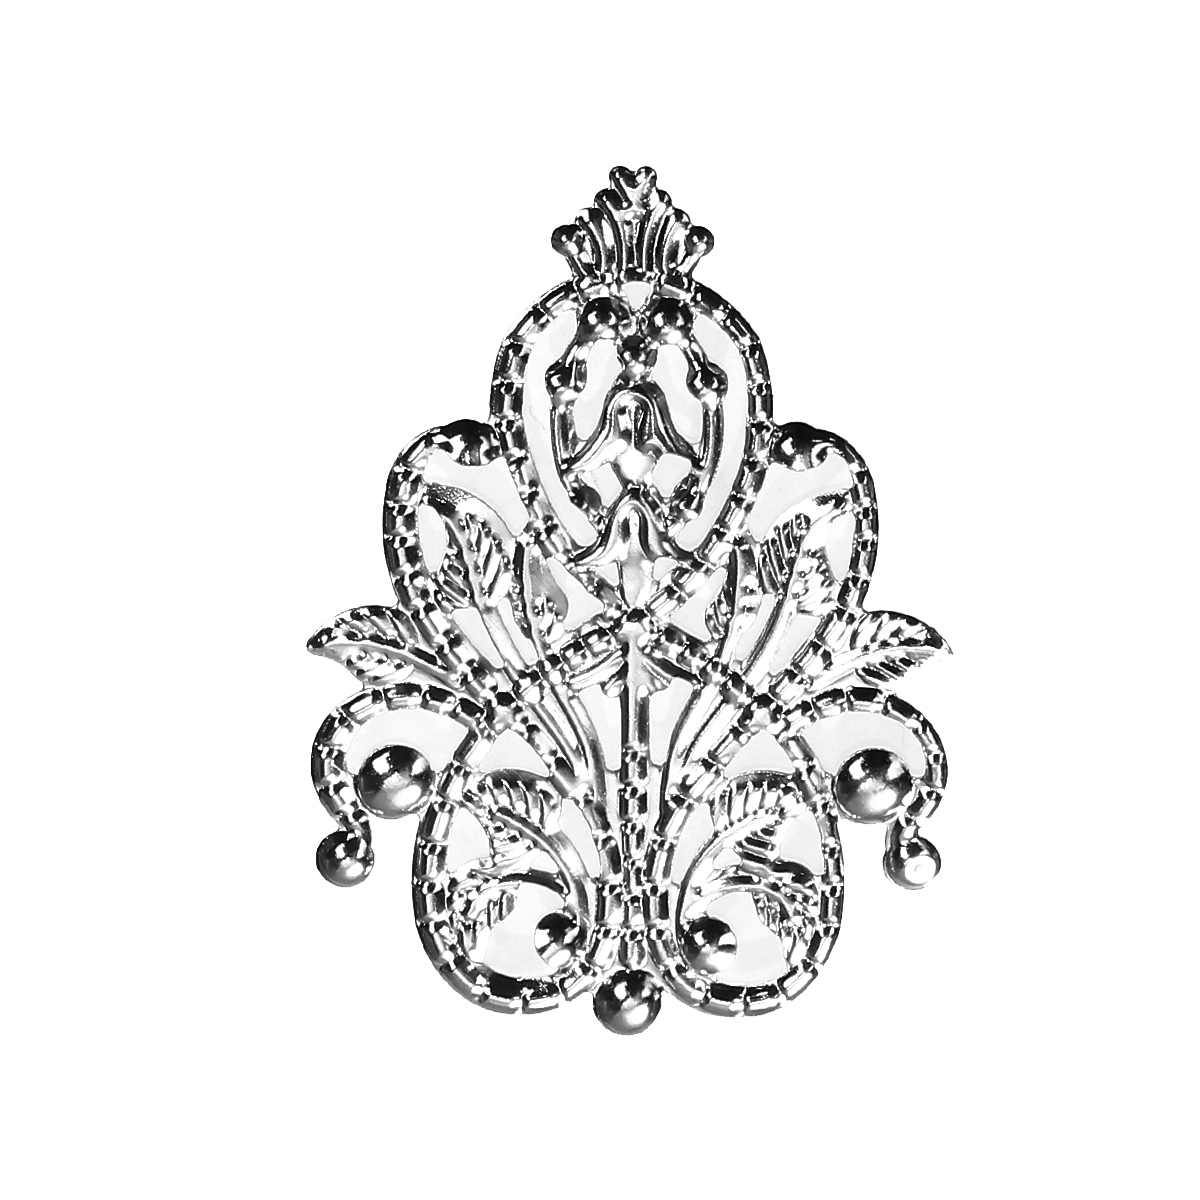 Picture of Iron Based Alloy Embellishments Crown Silver Tone Filigree Carved 48mm(1 7/8") x 35mm(1 3/8"), 30 PCs